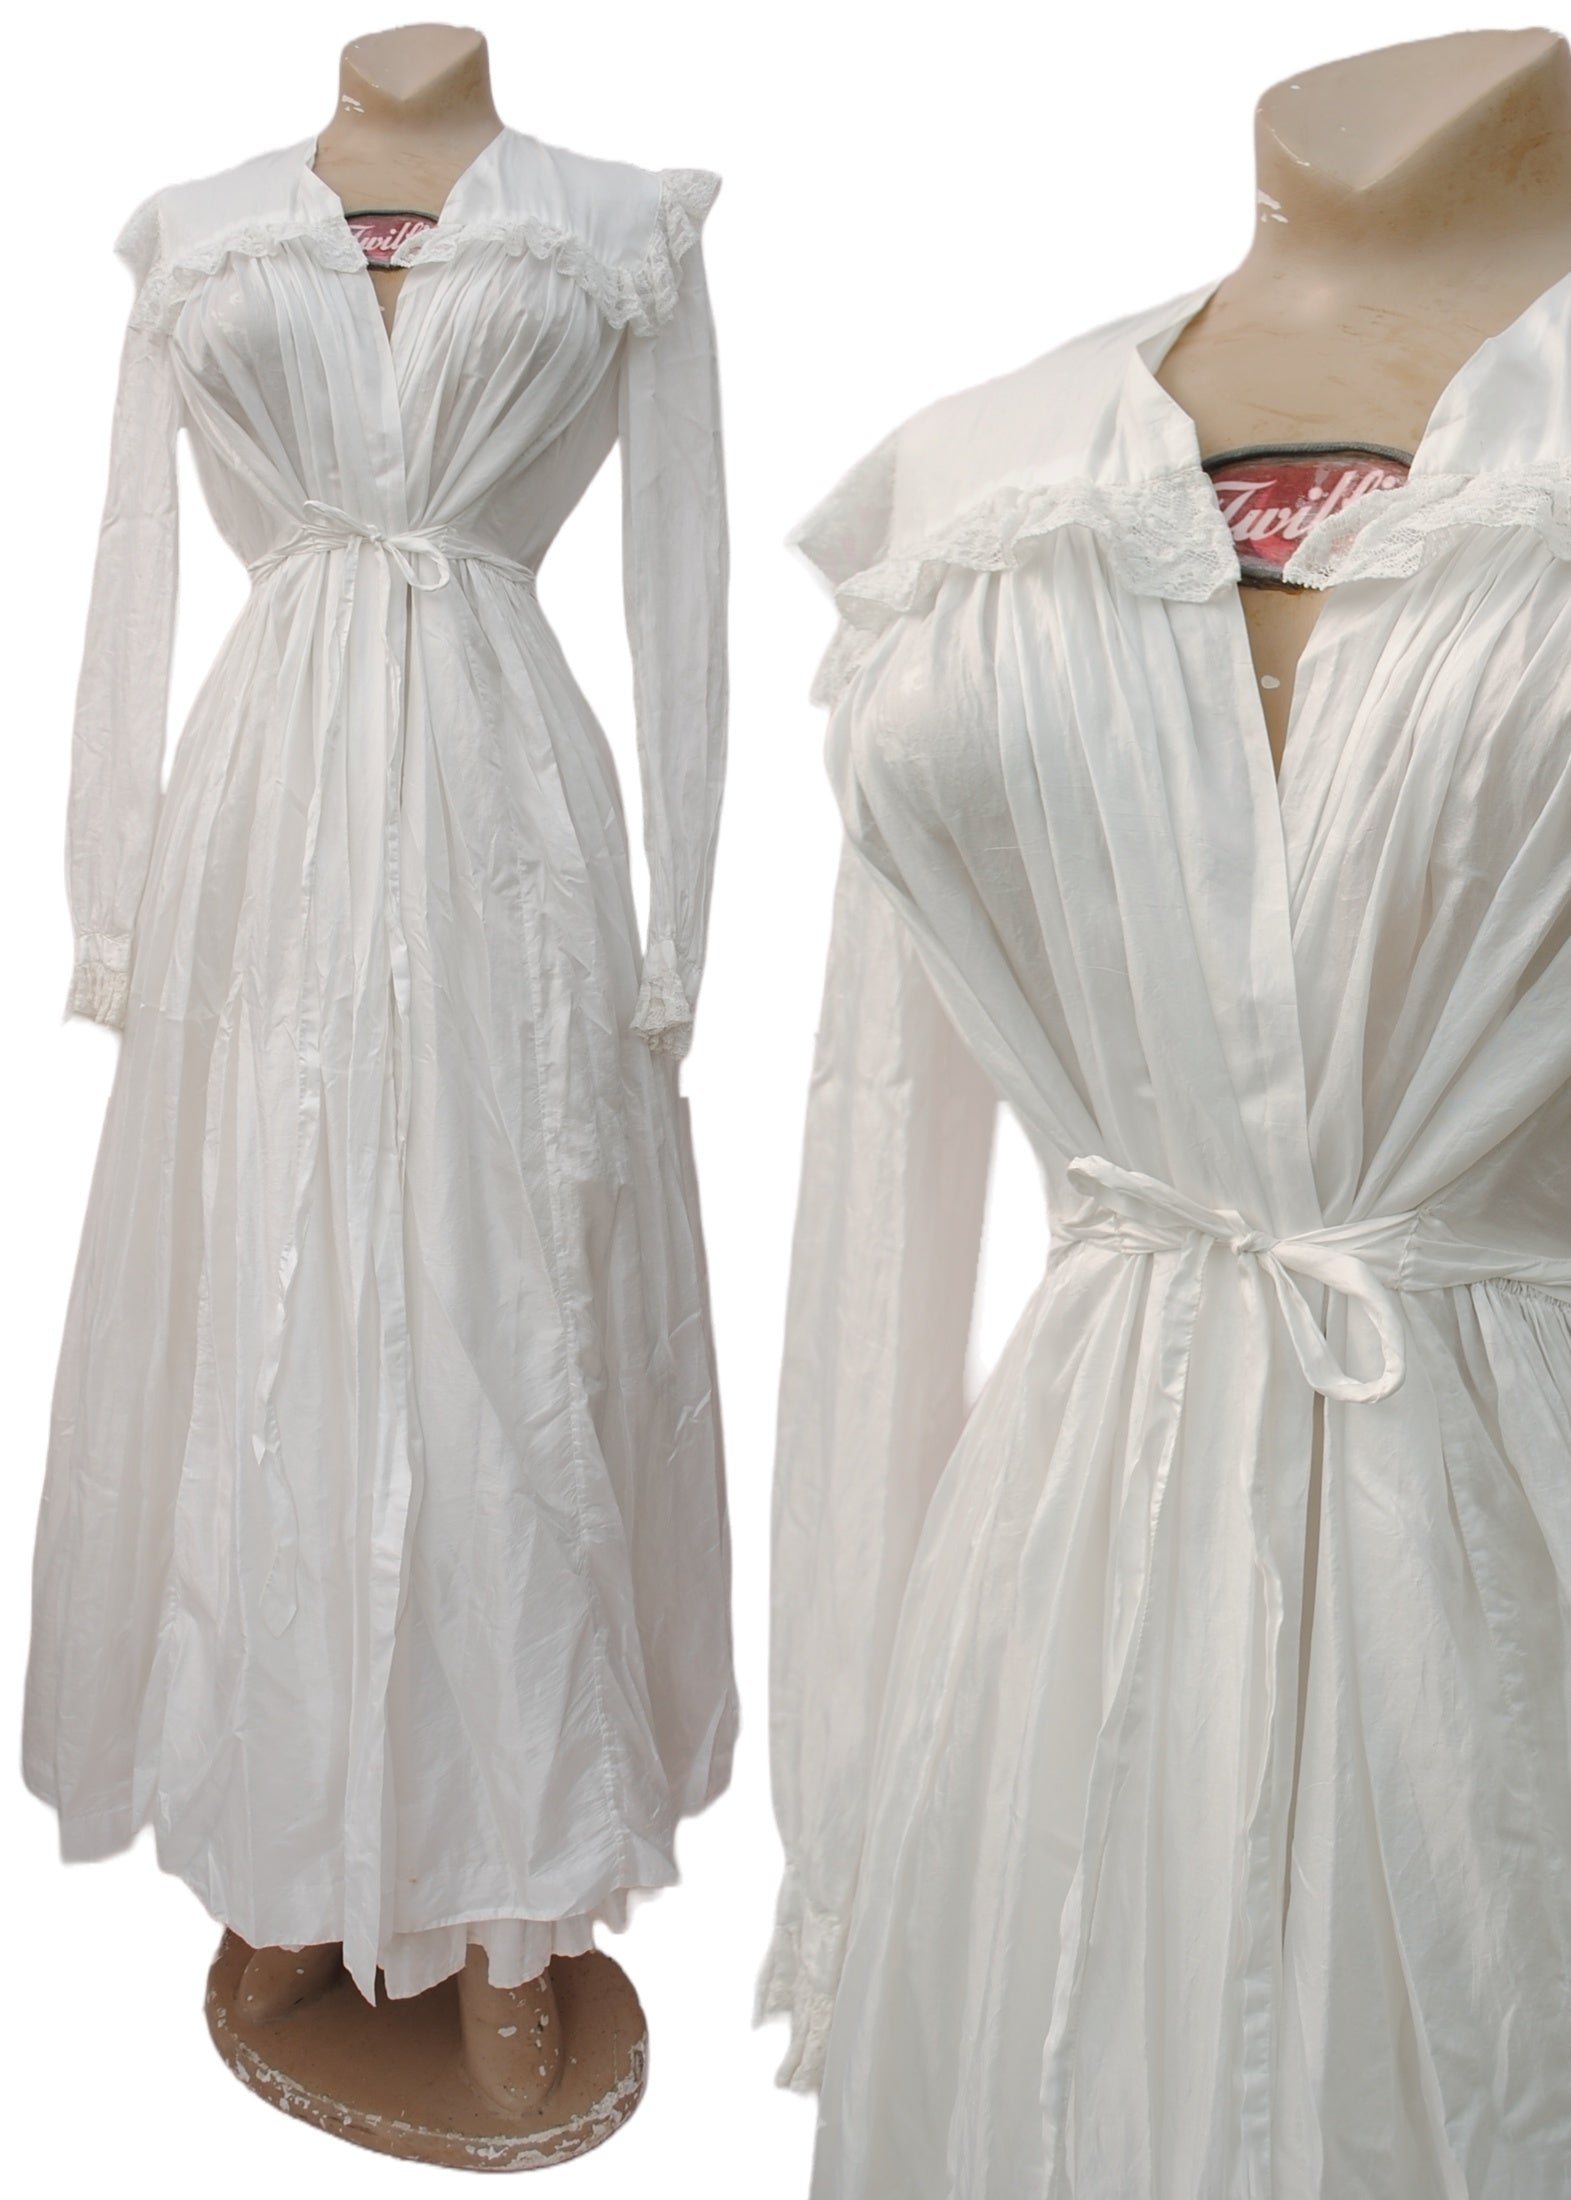 the most exquisite antique vintage white silk peignoir robe you have ever seen, with tissue thin silk voluminous gathering, hand stitched